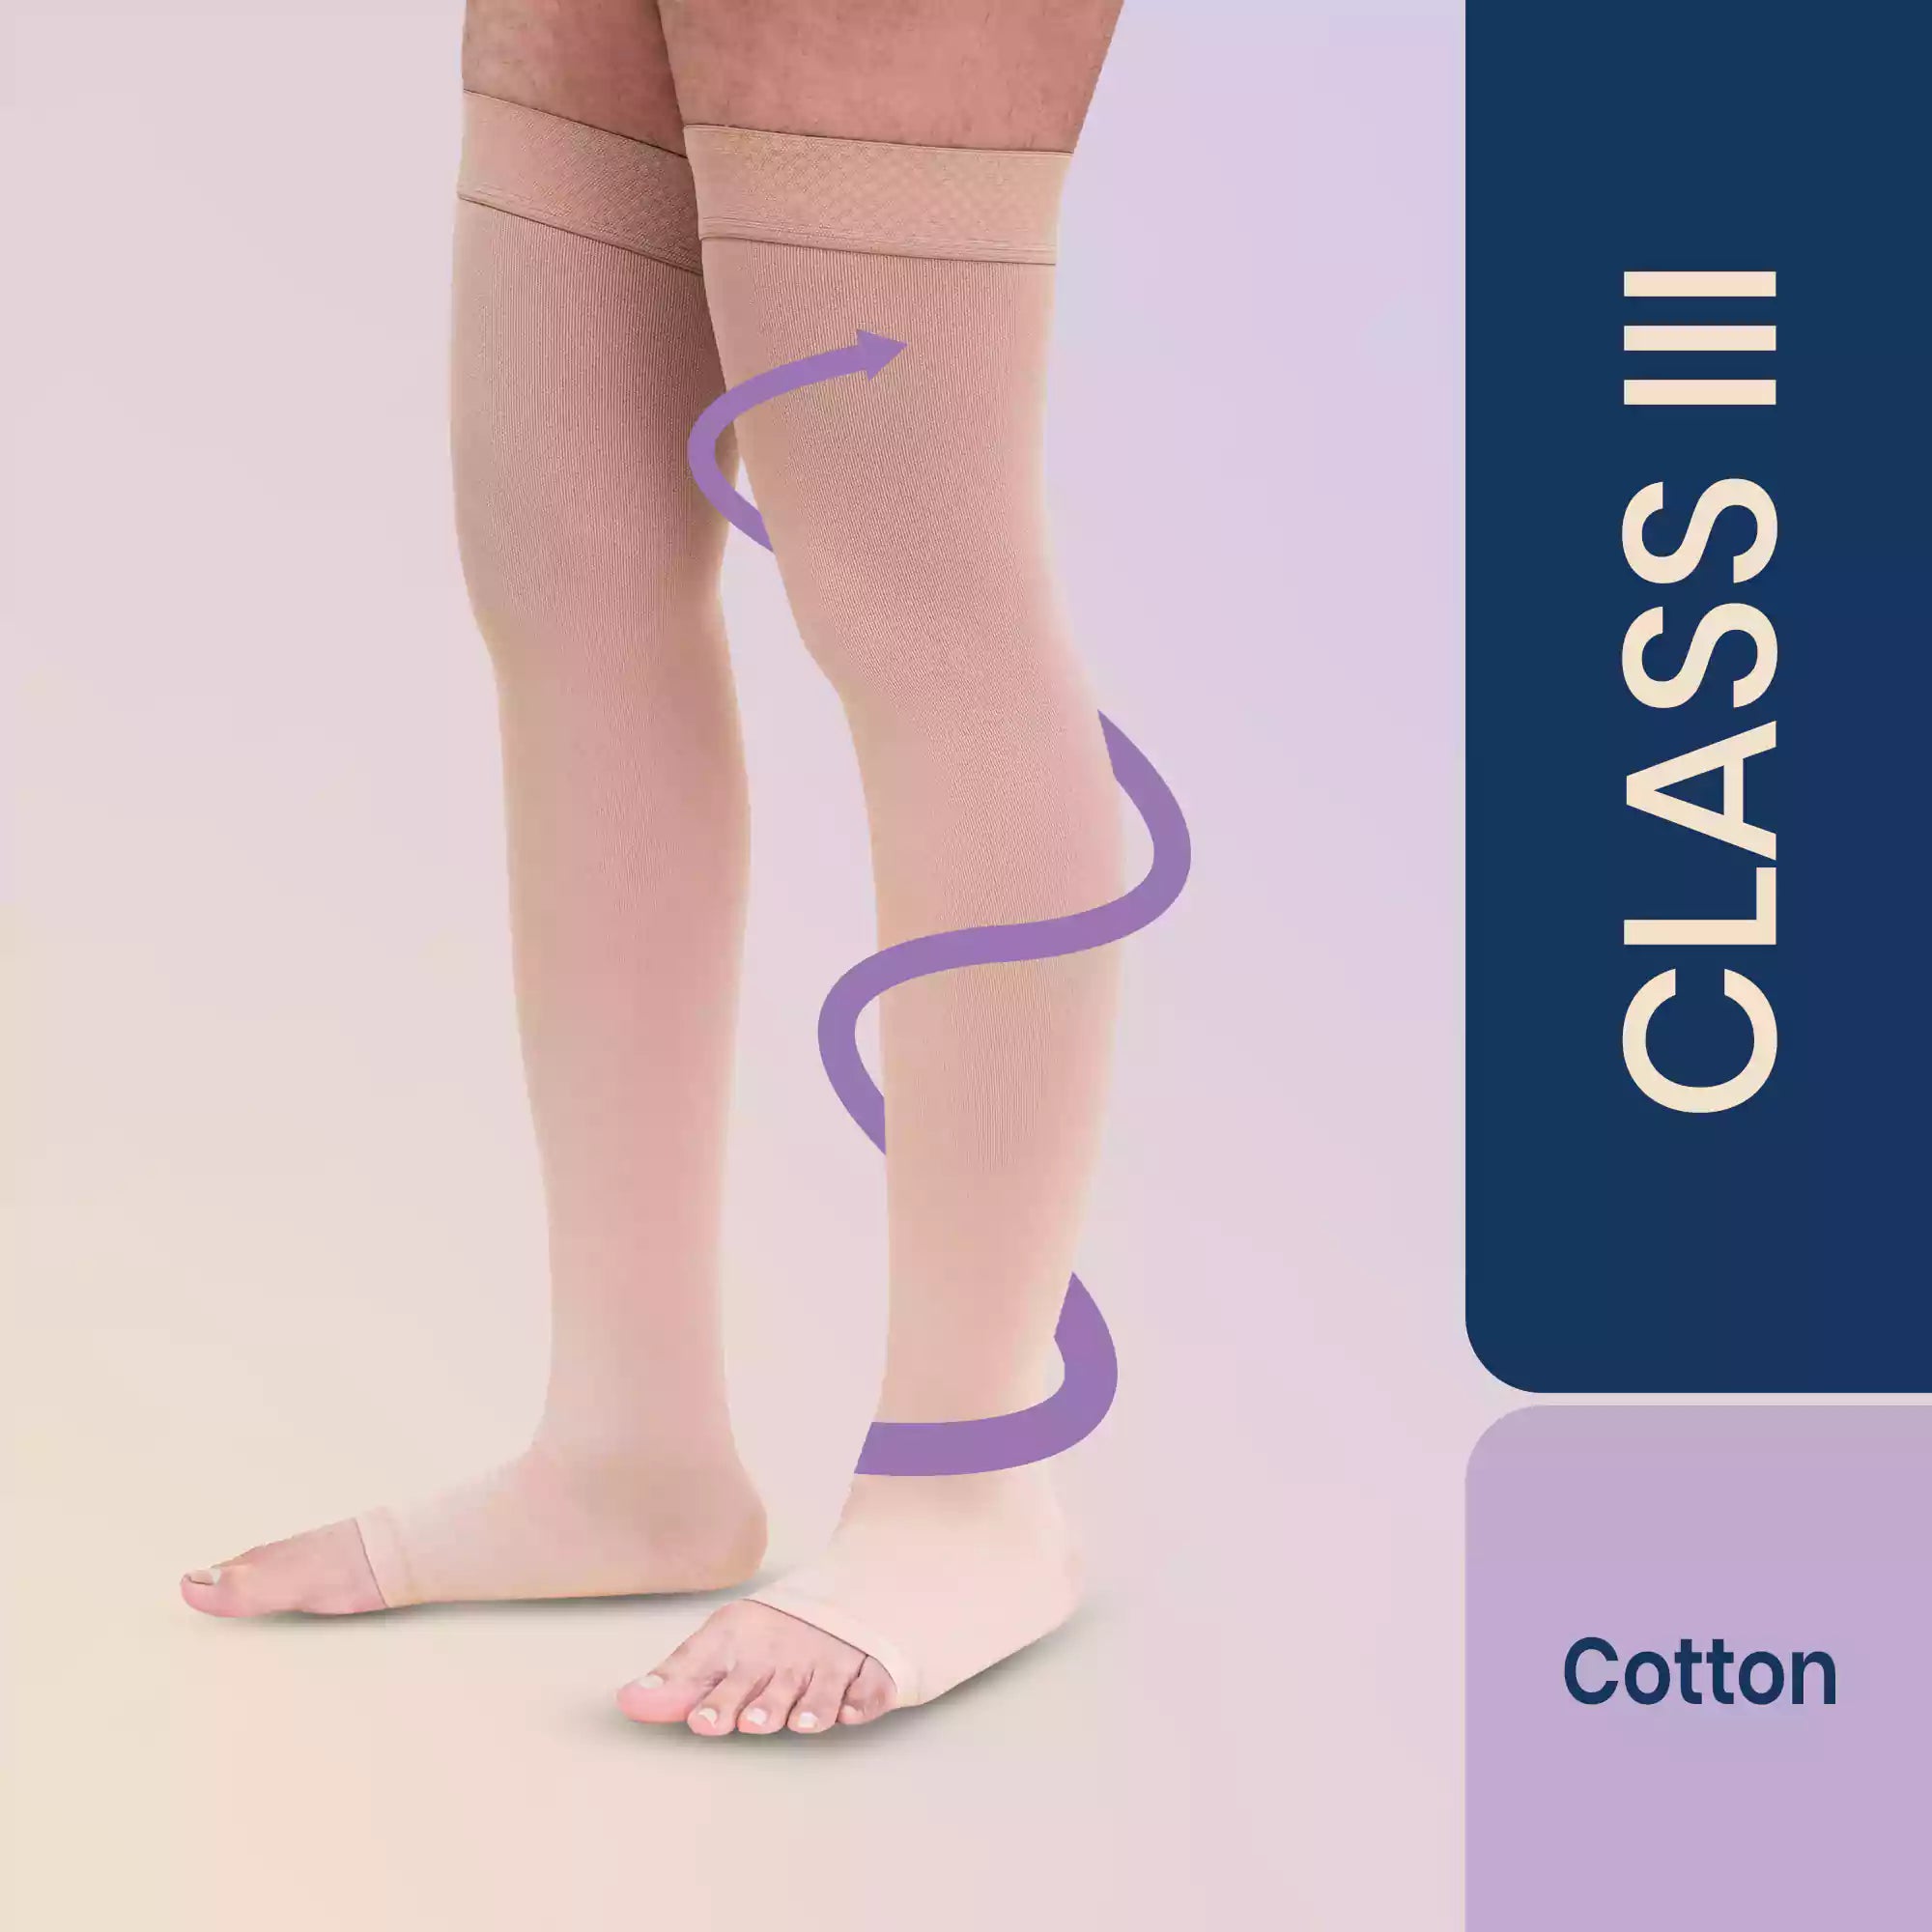 Sorgen Classique (Lycra) Medical Compression Stockings For Varicose Veins  Class 1 Thigh Length (Medium): Uses, Price, Dosage, Side Effects,  Substitute, Buy Online